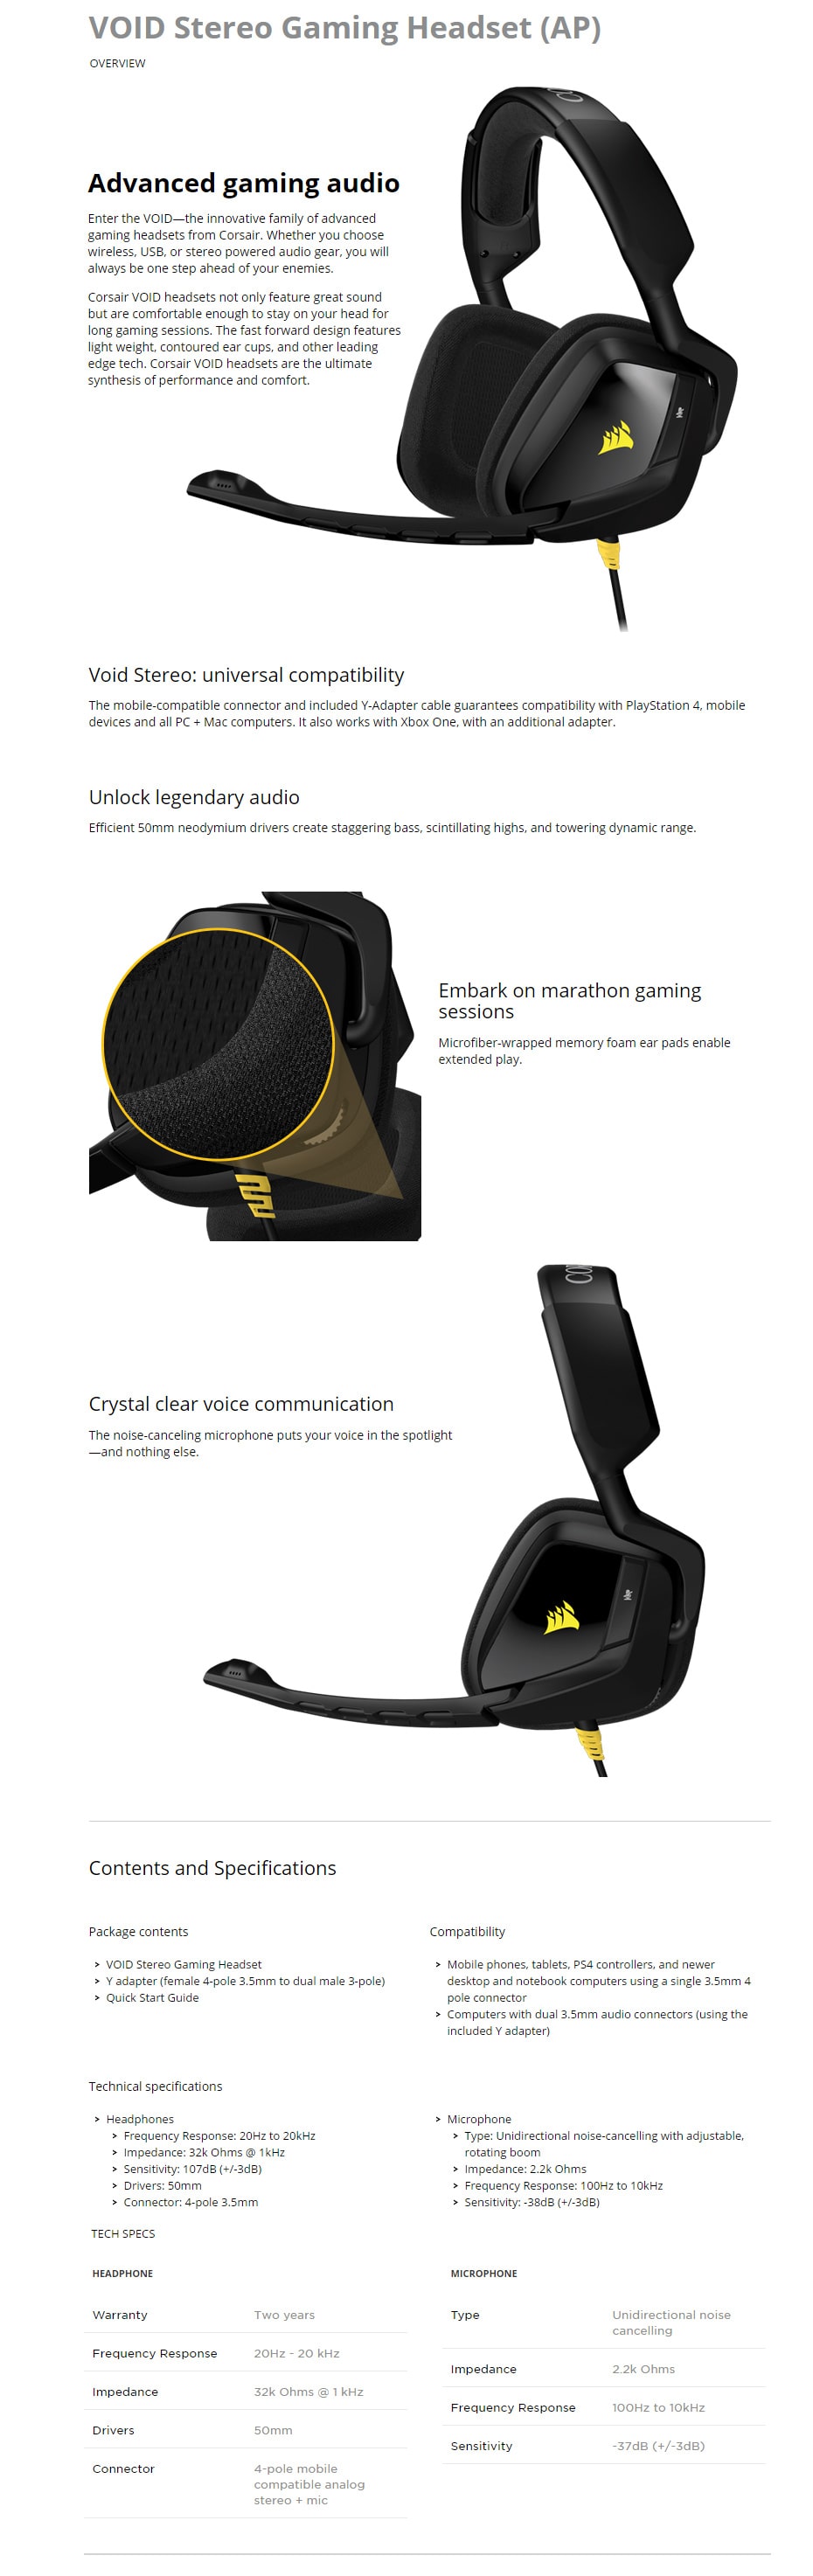 Corsair VOID Stereo Gaming Headset features